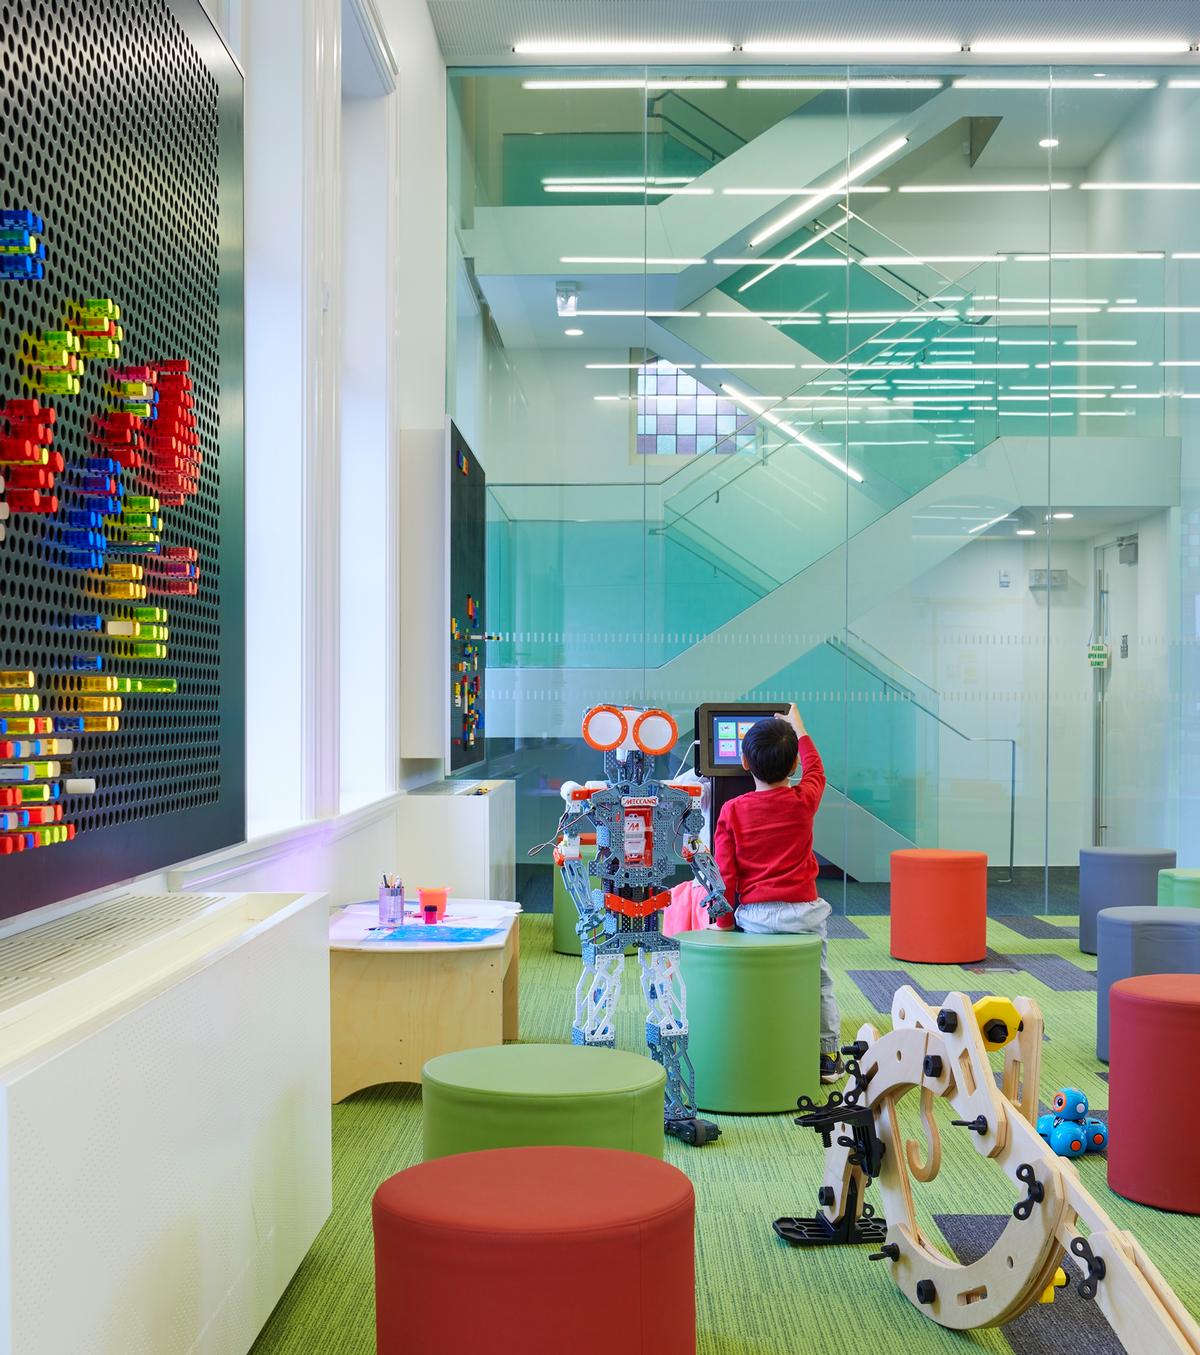 Other facilities include a children's discovery centre / Tom Arban